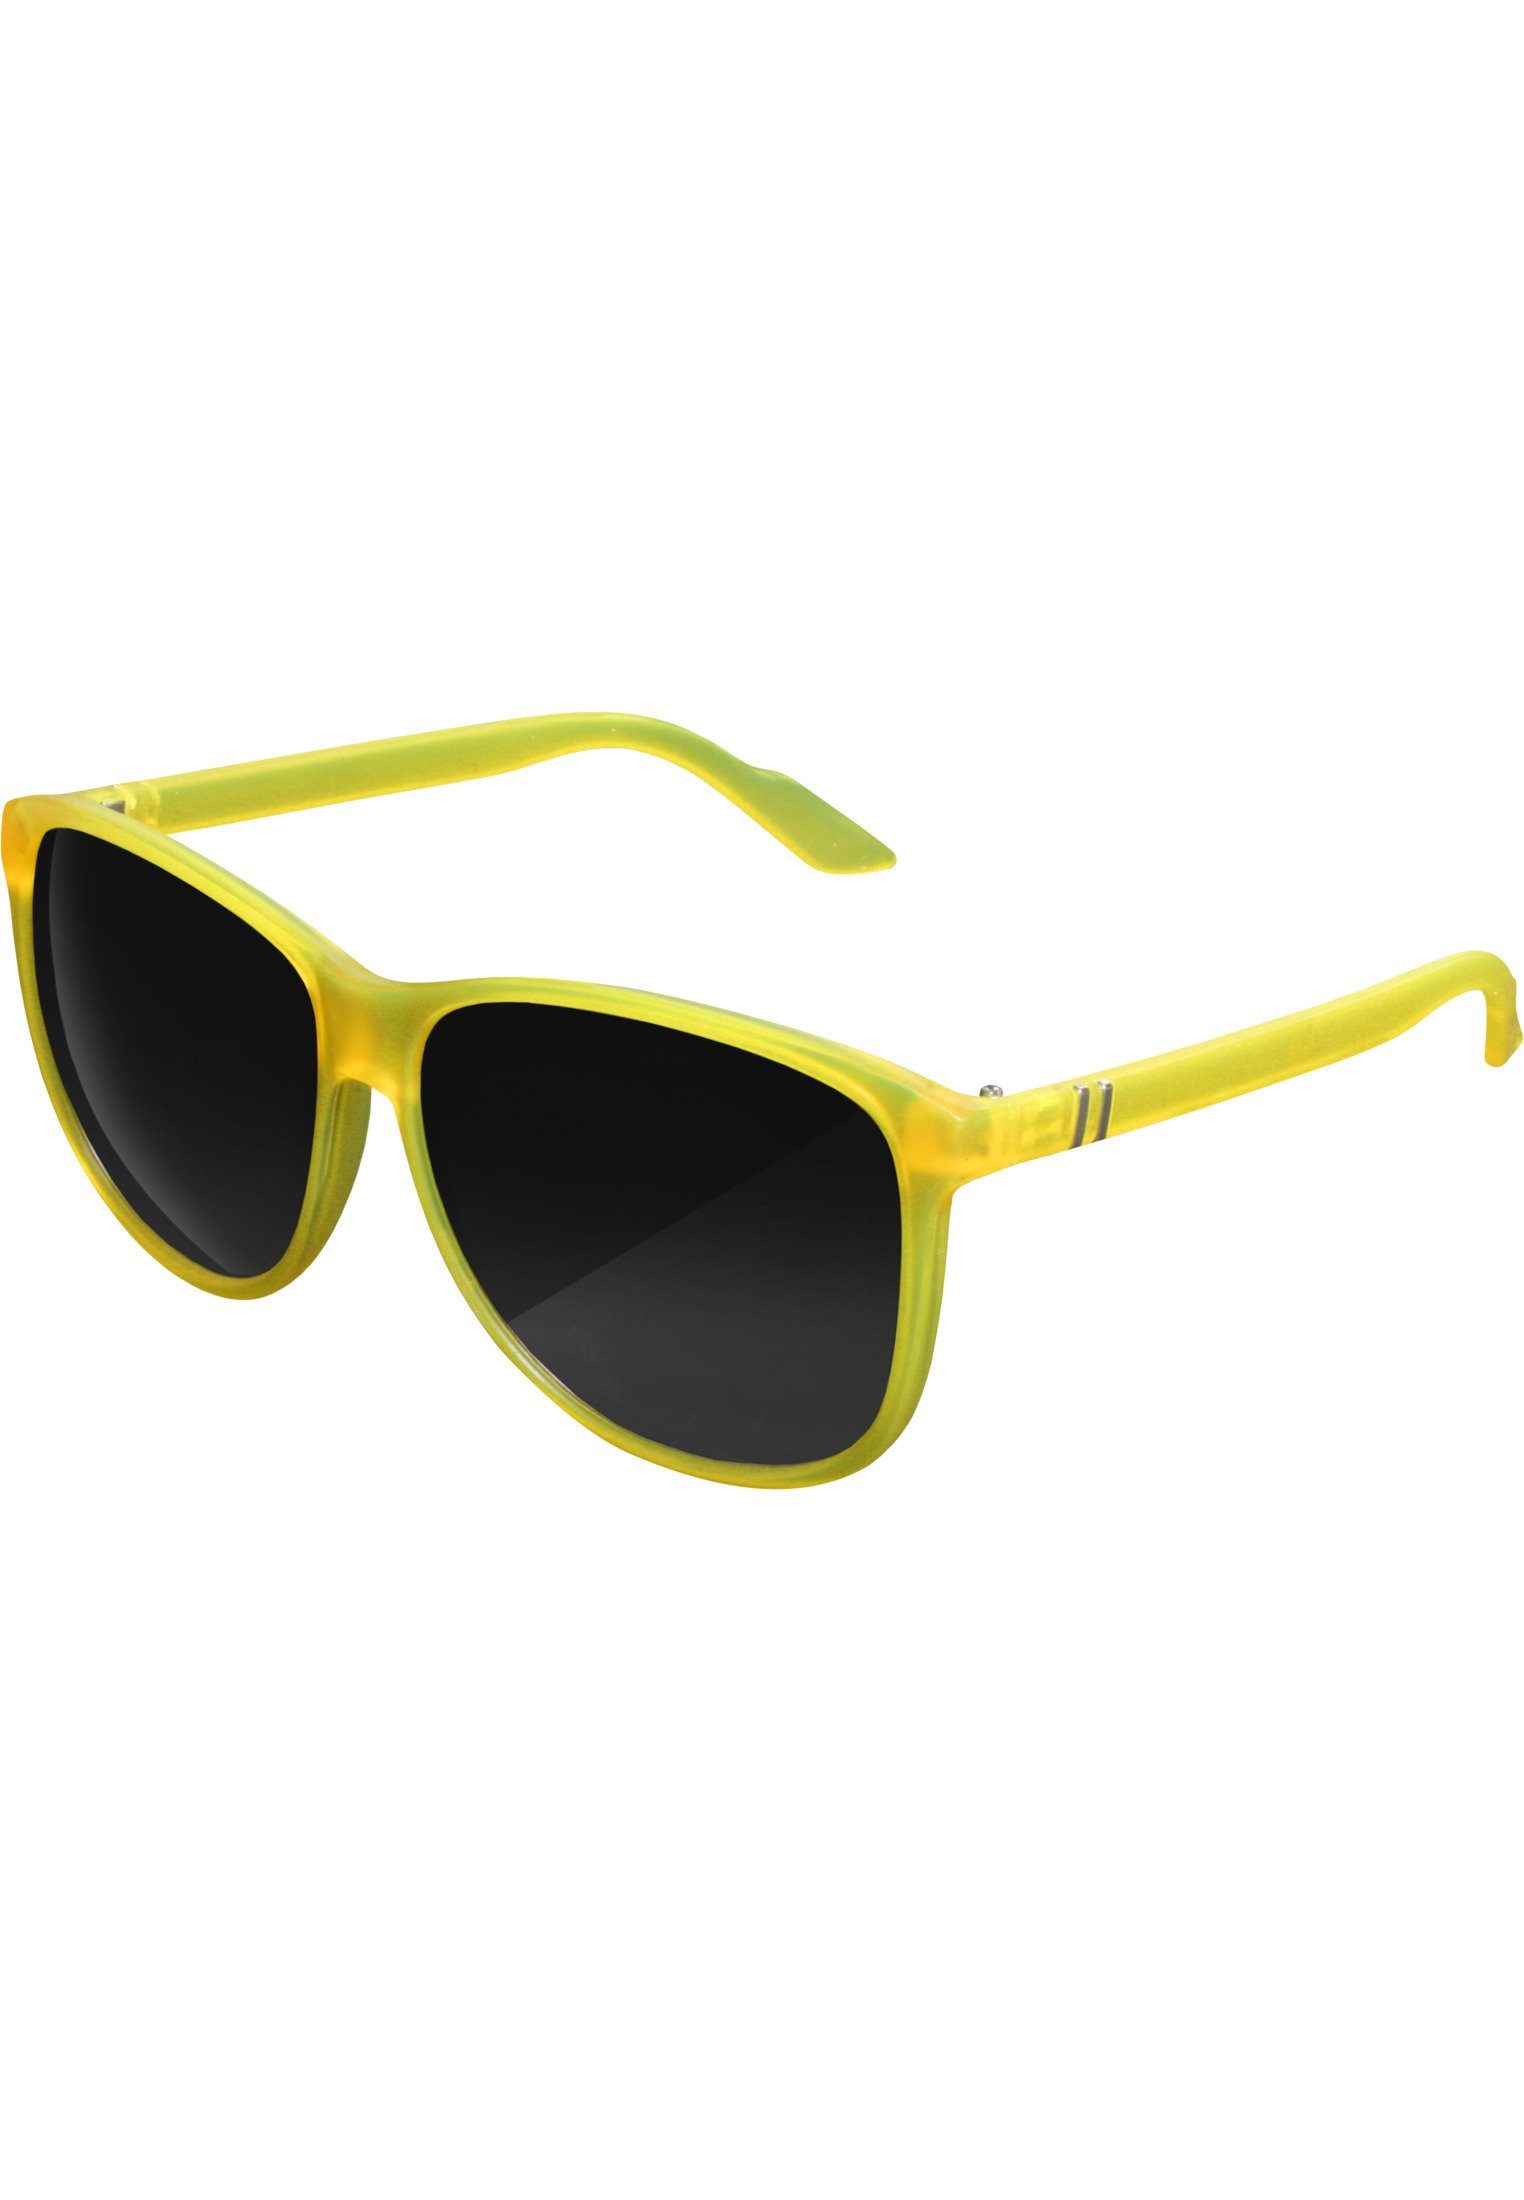 neonyellow Sonnenbrille Sunglasses MSTRDS Chirwa Accessoires